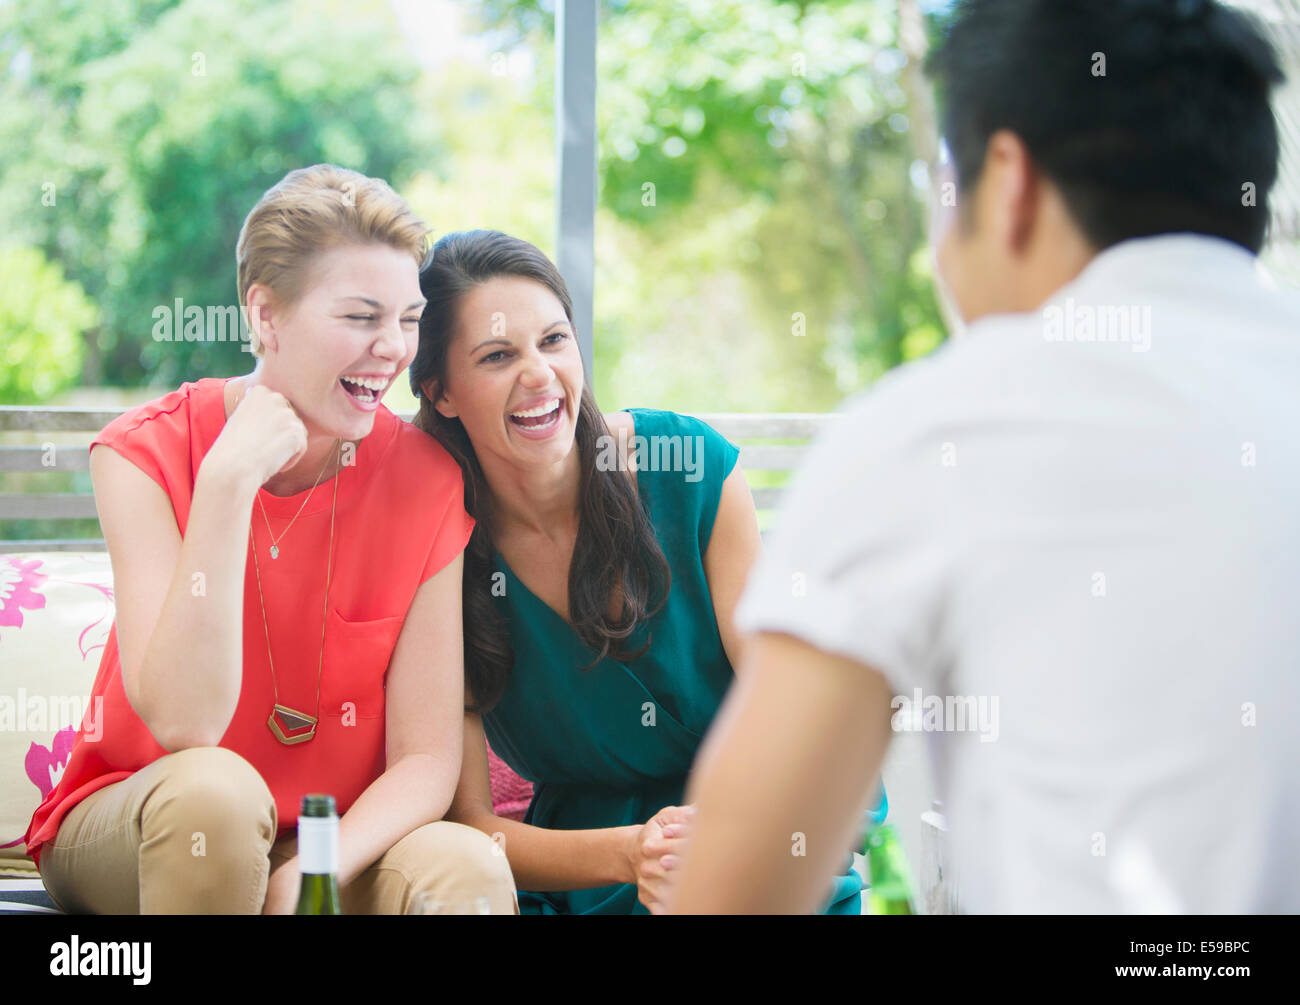 Women laughing at party Stock Photo